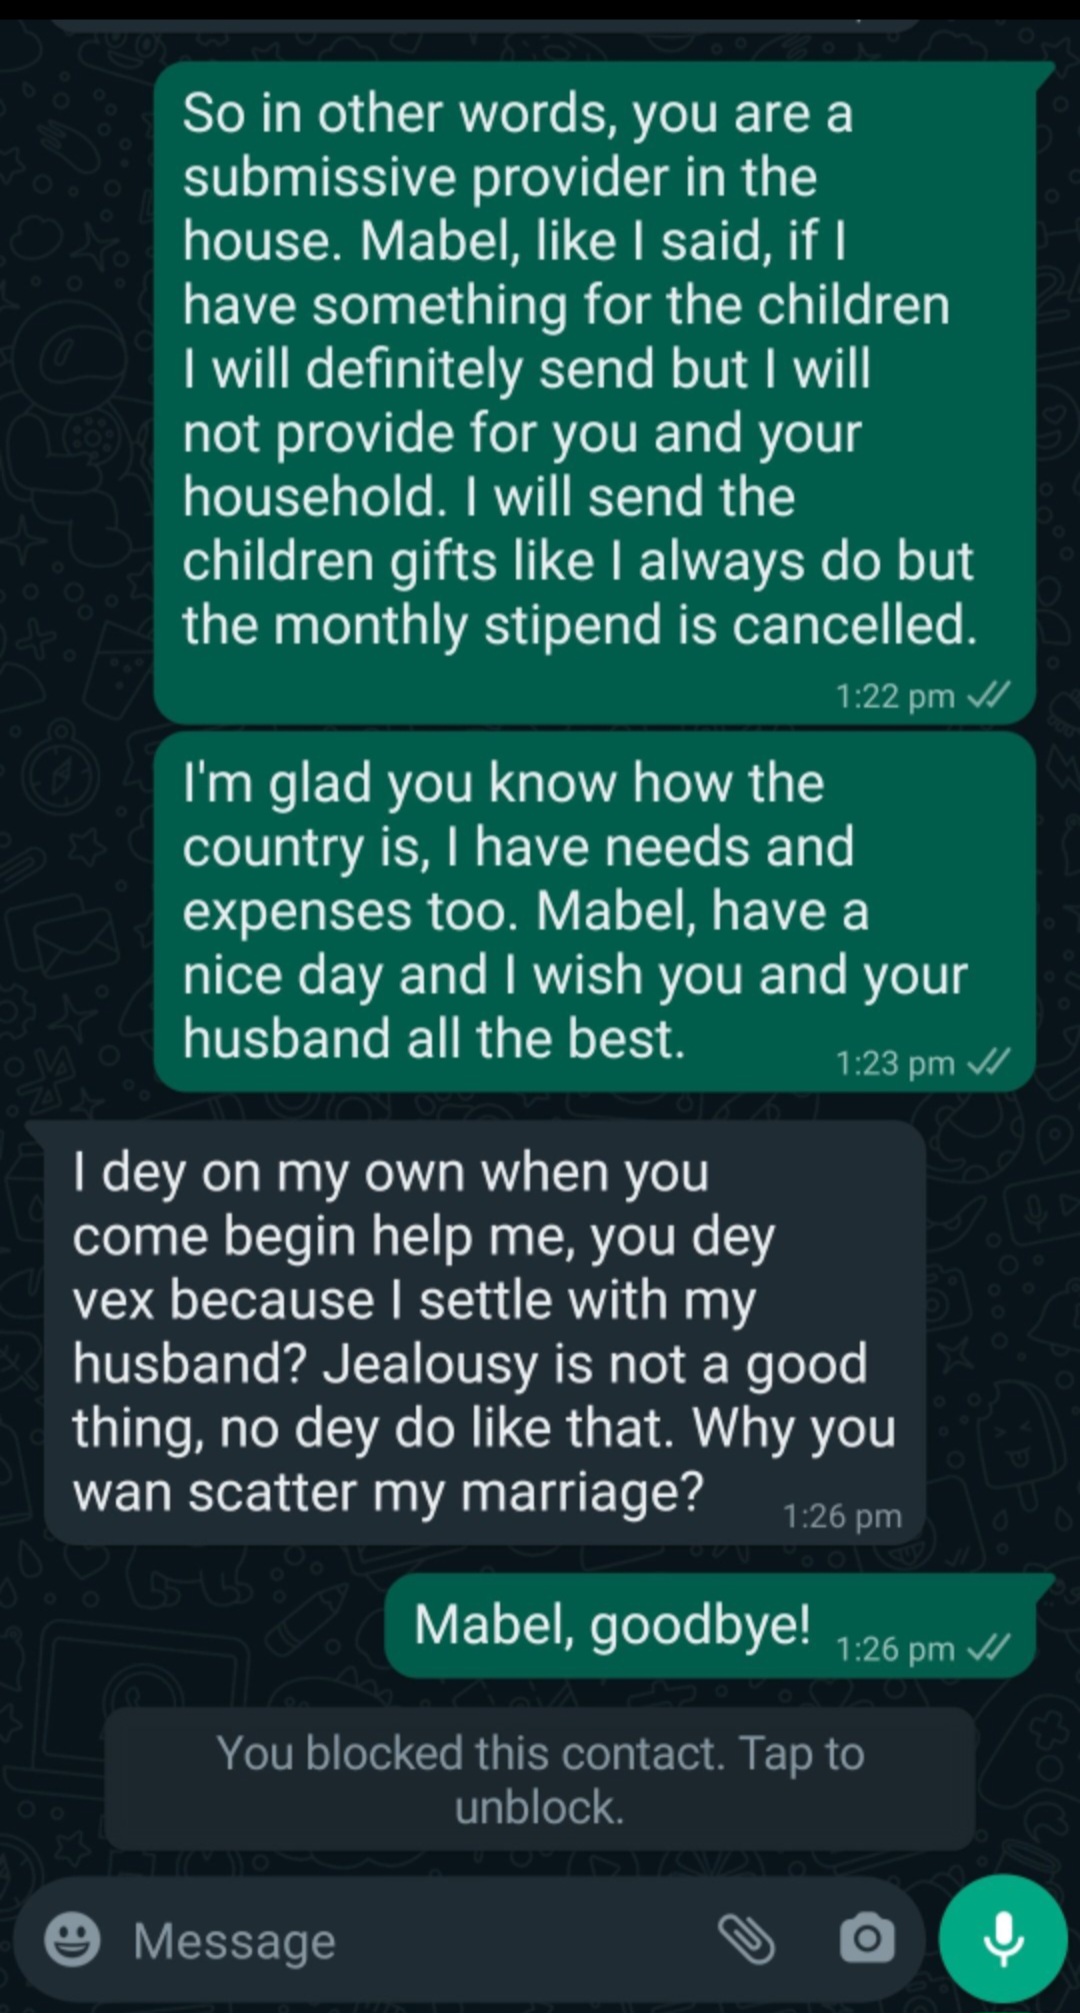 Woman shares message she received from domestic violence victim after she helped her financially